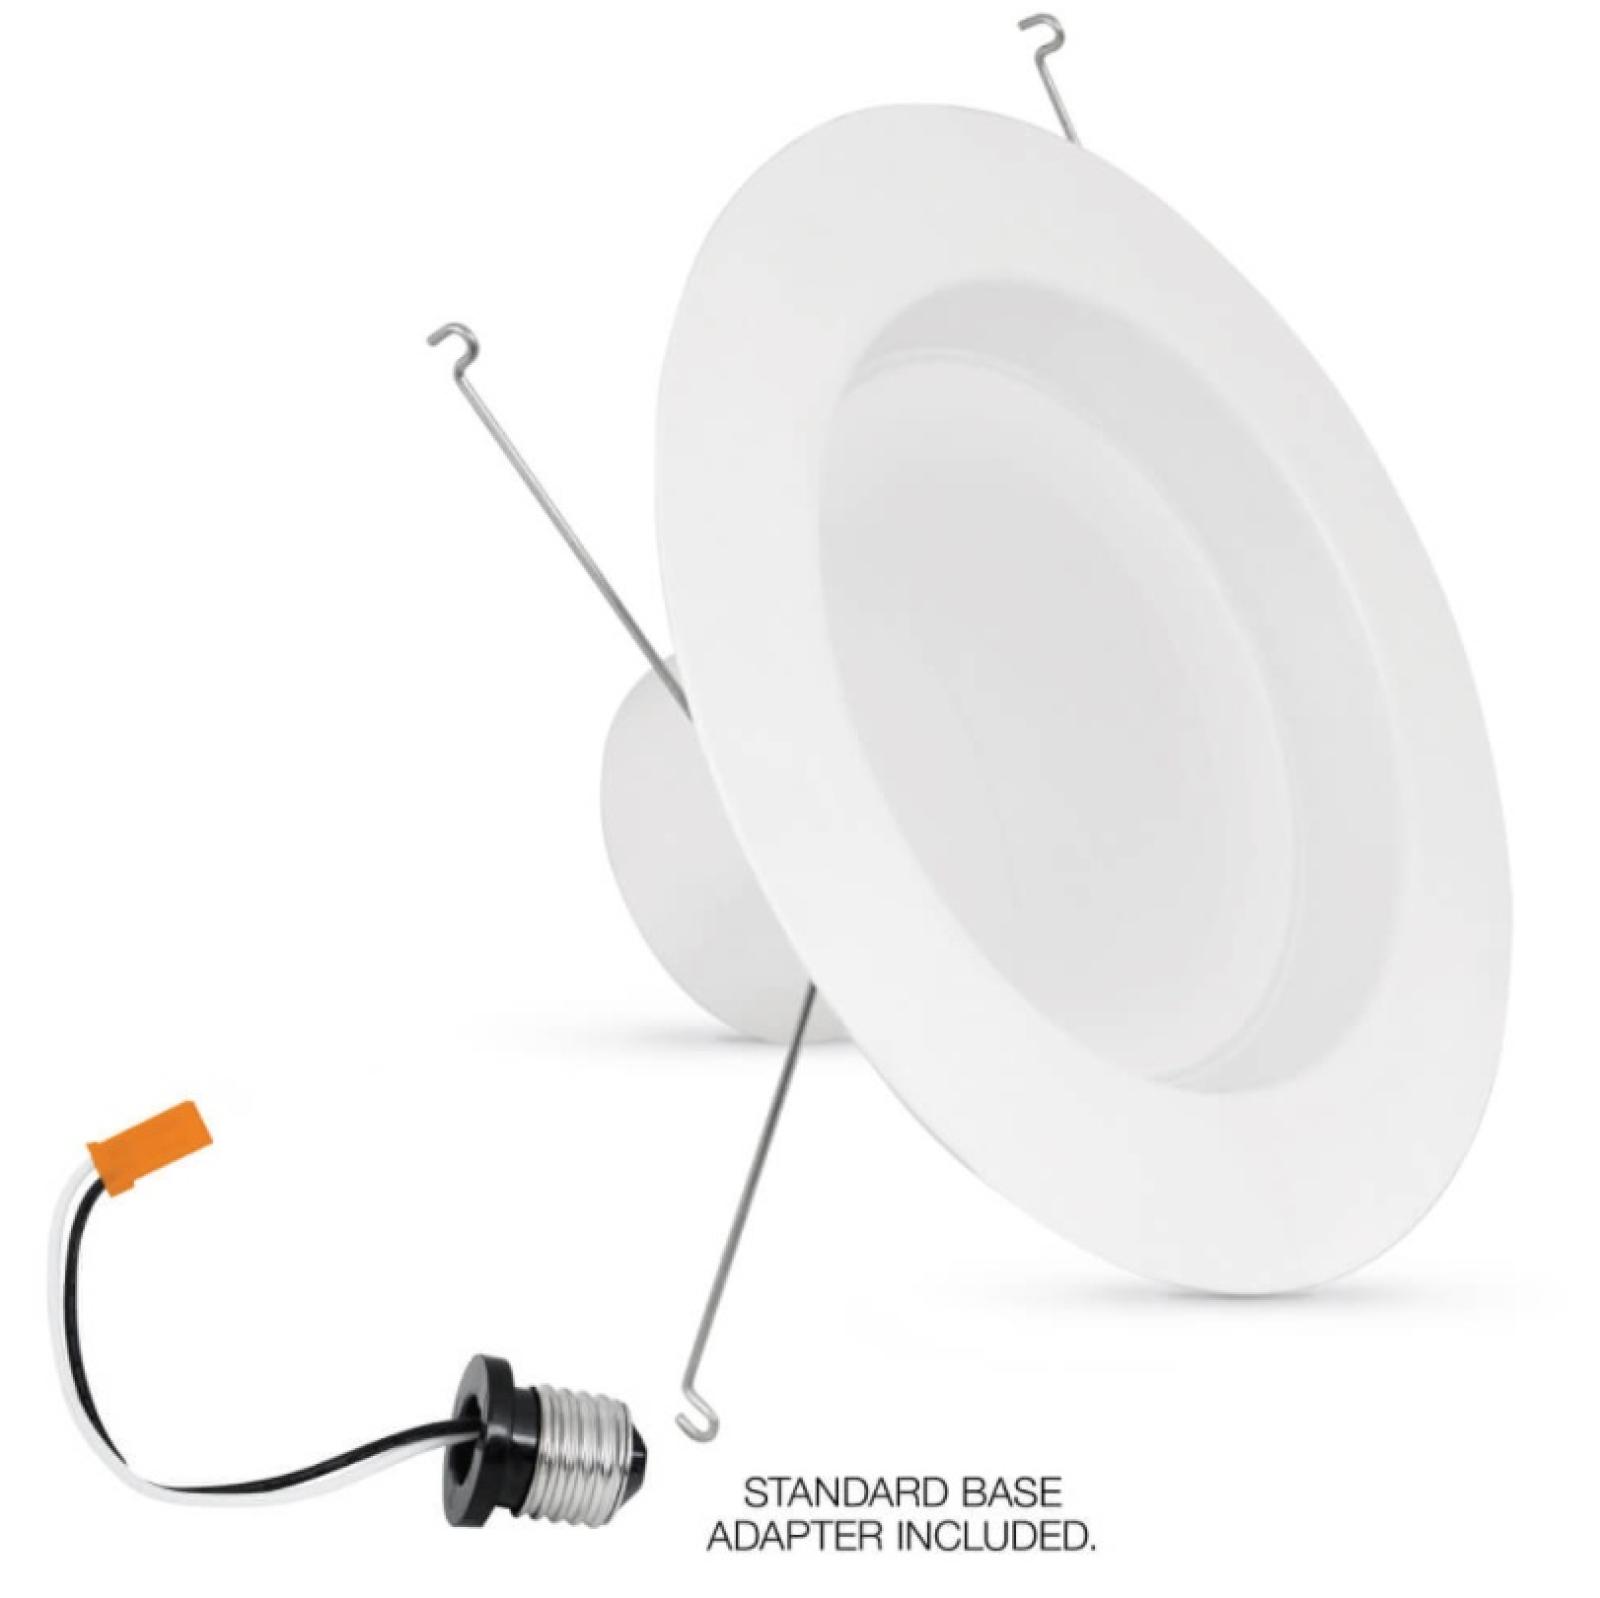 Feit Electric LED 120 Watt Equivalent 1250 Lumen 5 & 6 Inch Dimmable Recessed Downlight 